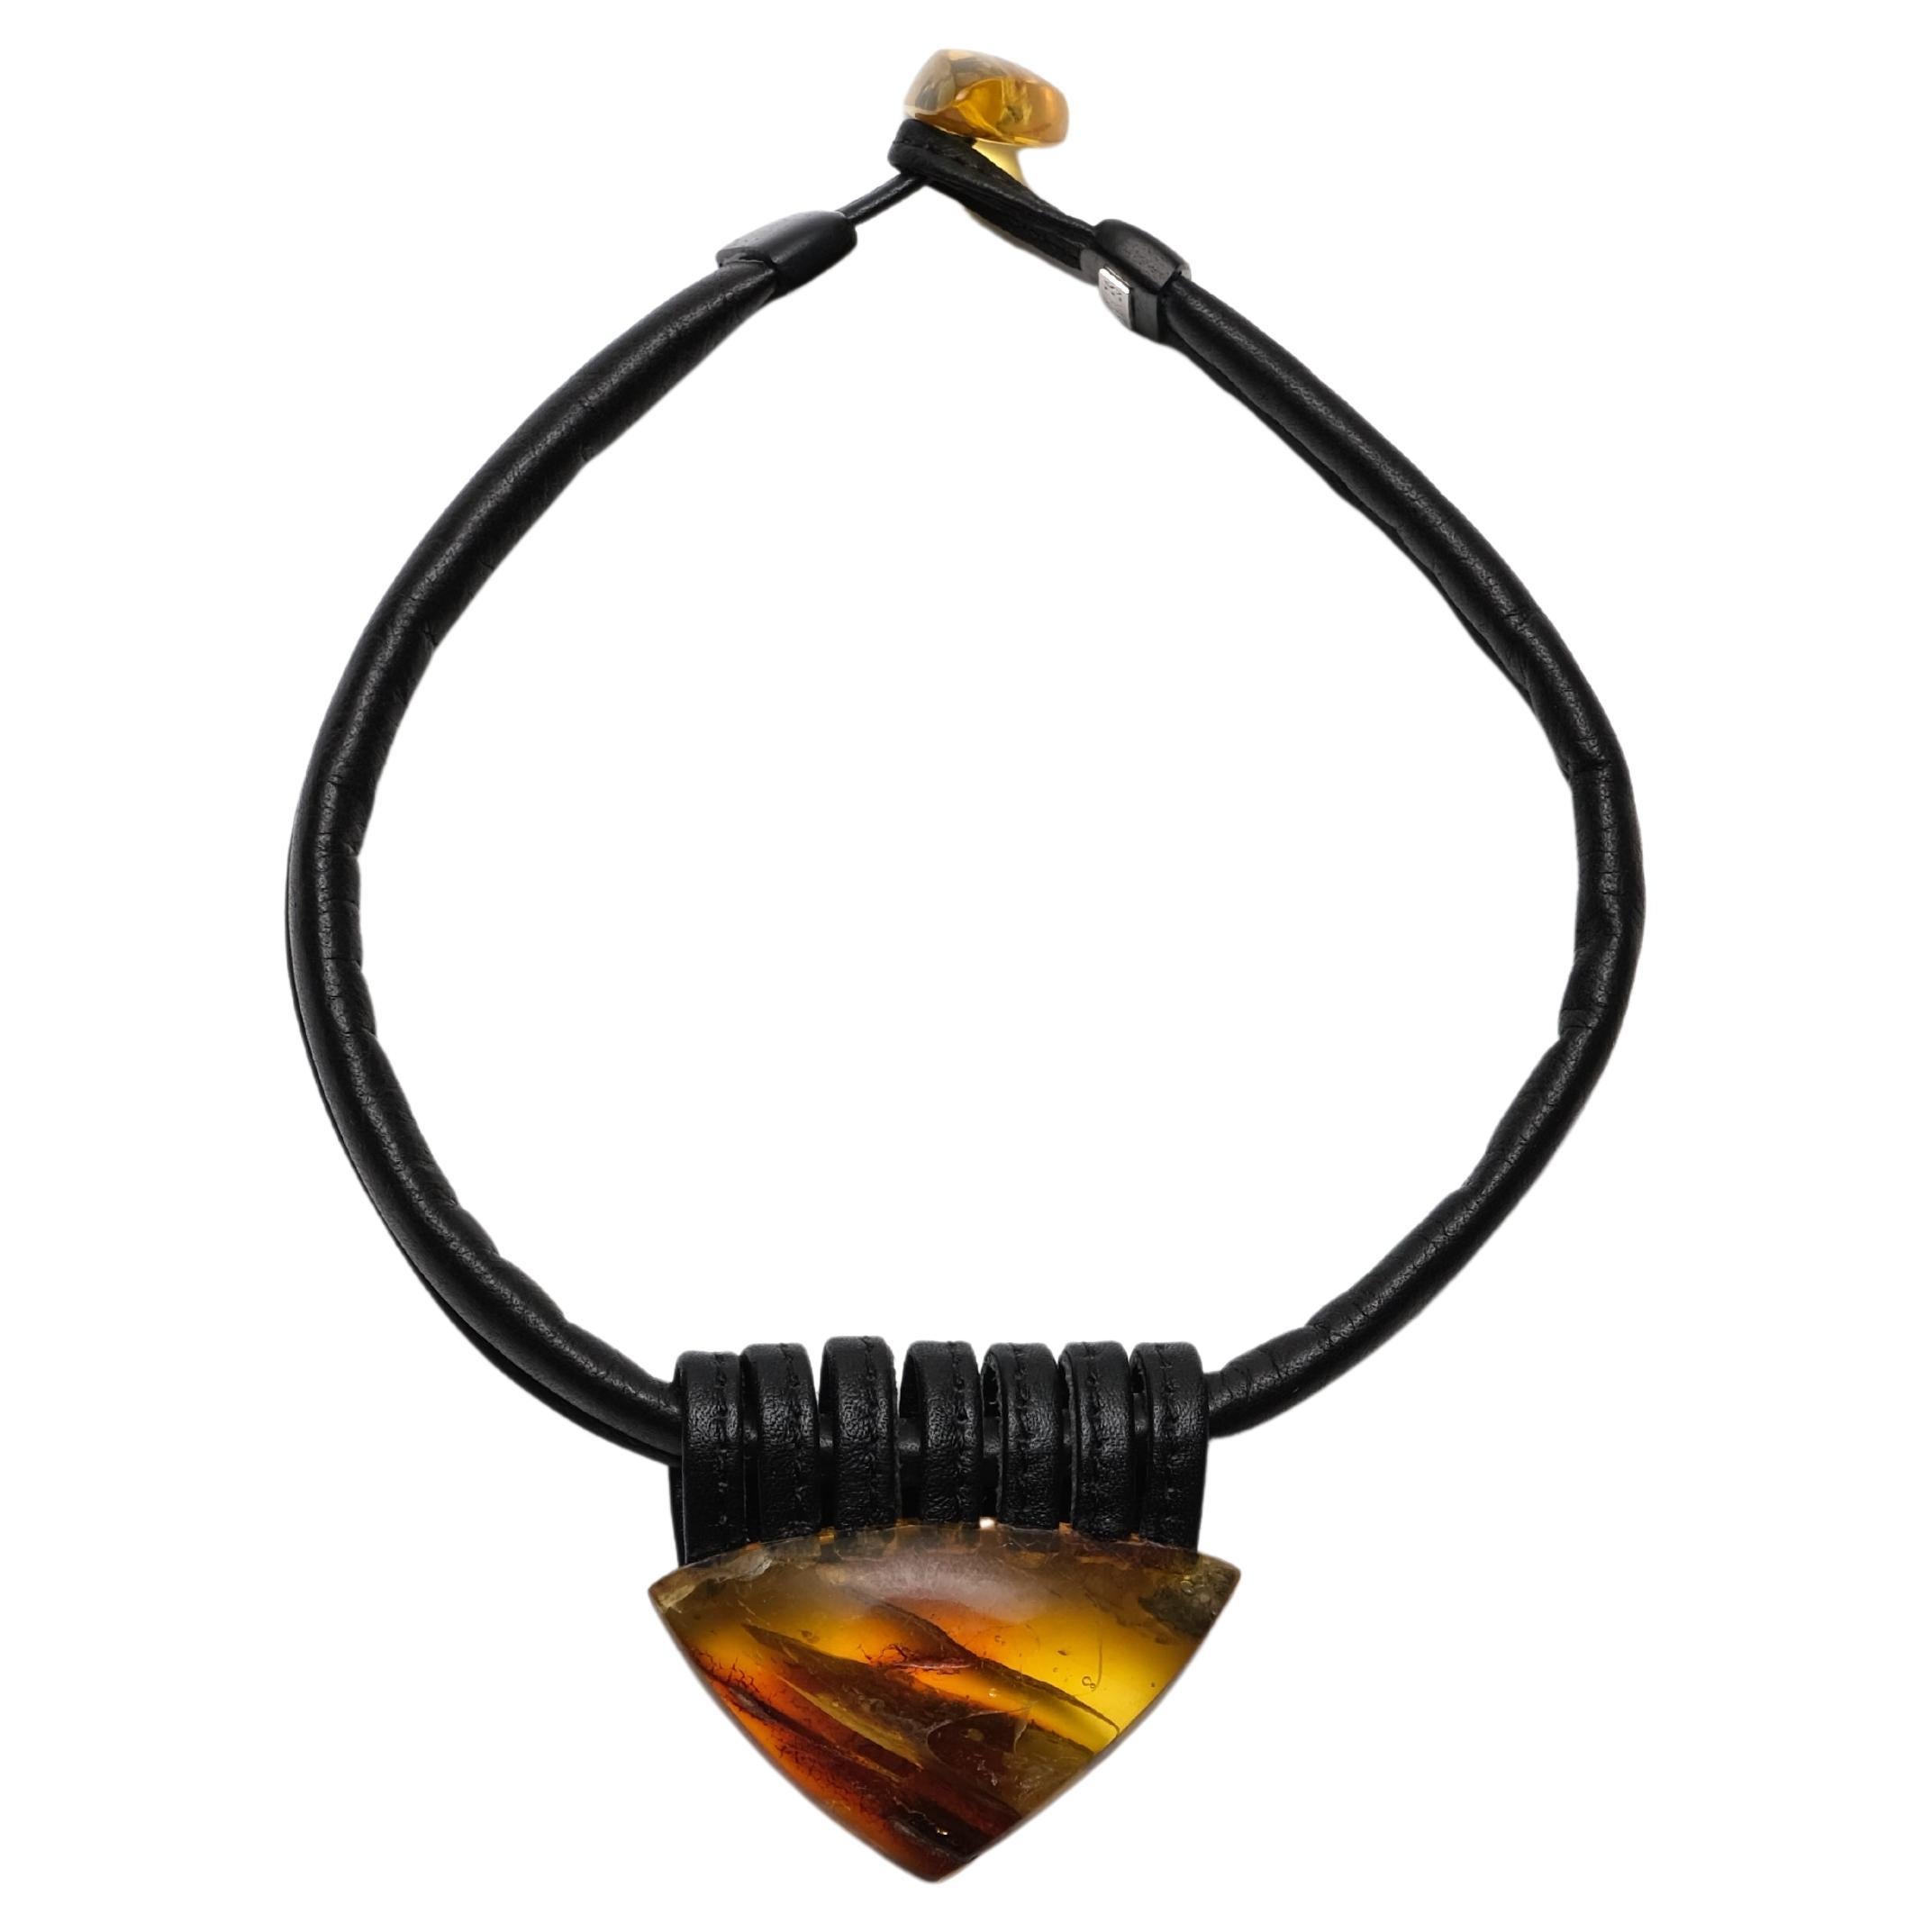 One-of-a-Kind Necklace in Amber and Leather from the Danish Brand Monies